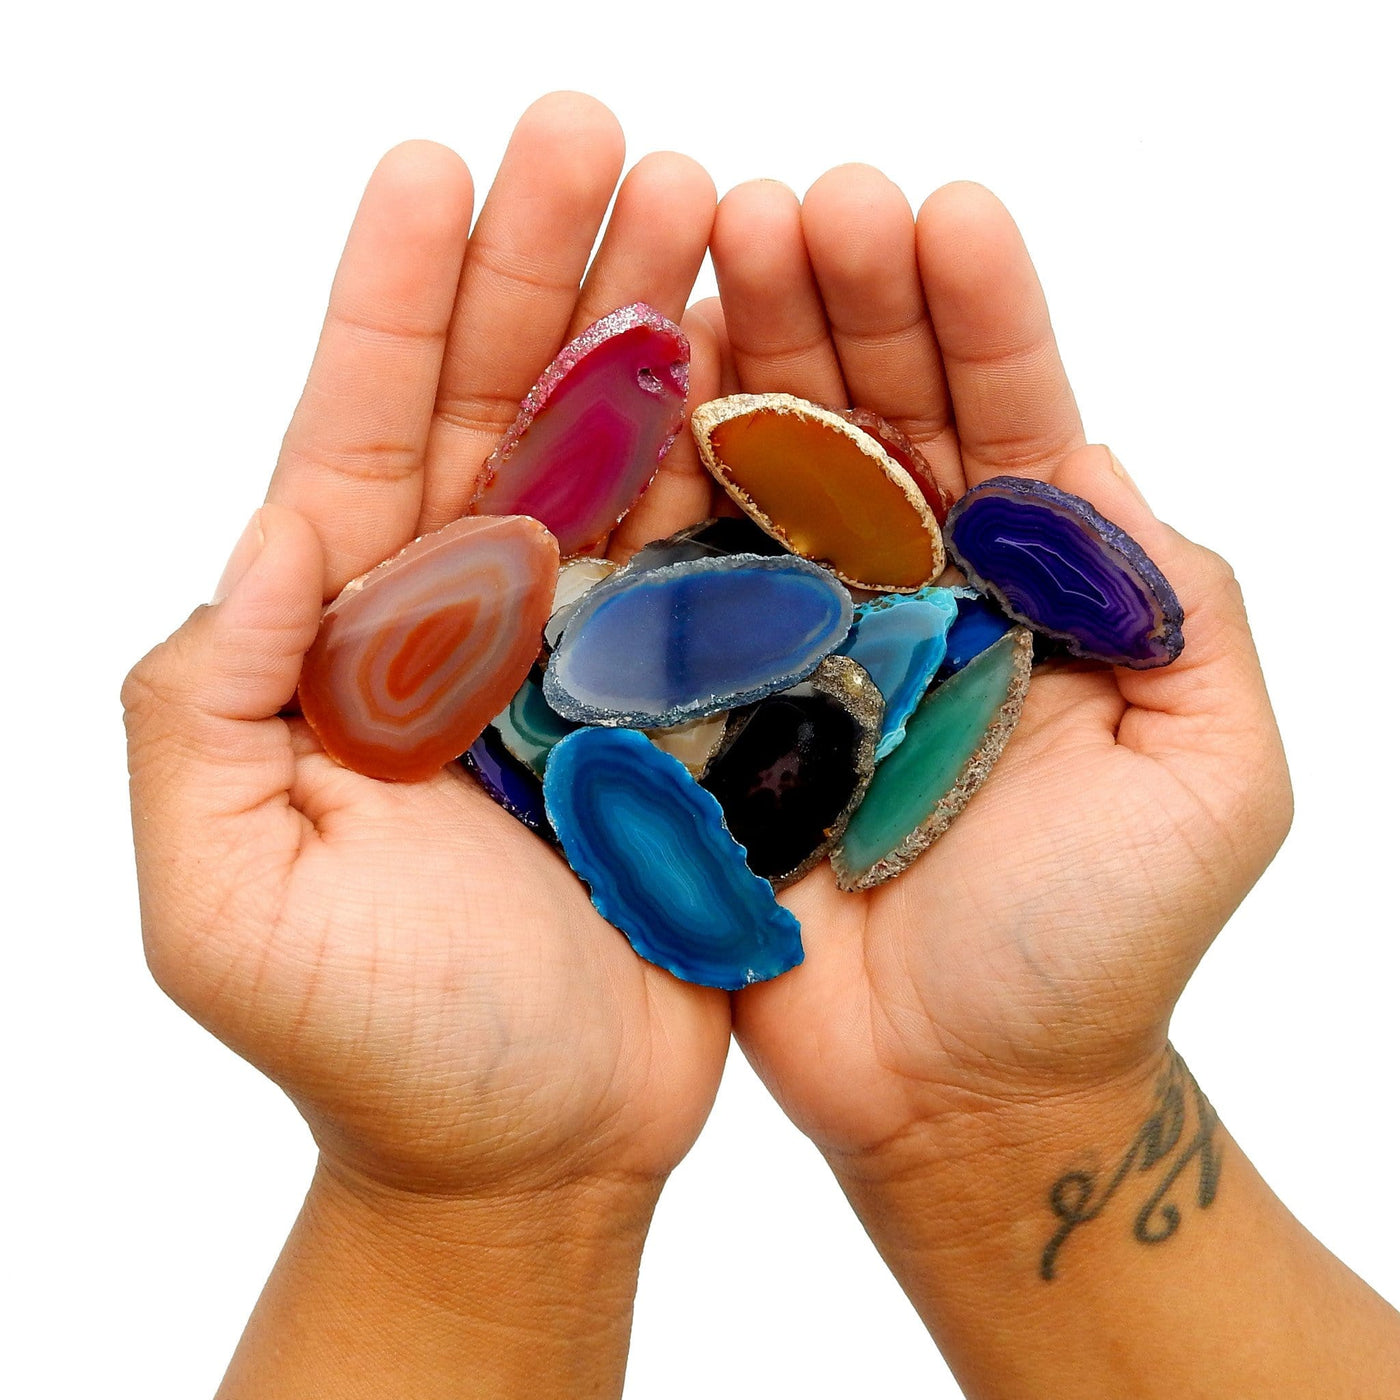 This picture is showing all the colors we have available for our size 000 agate slices, also they are also being displayed in hands. 